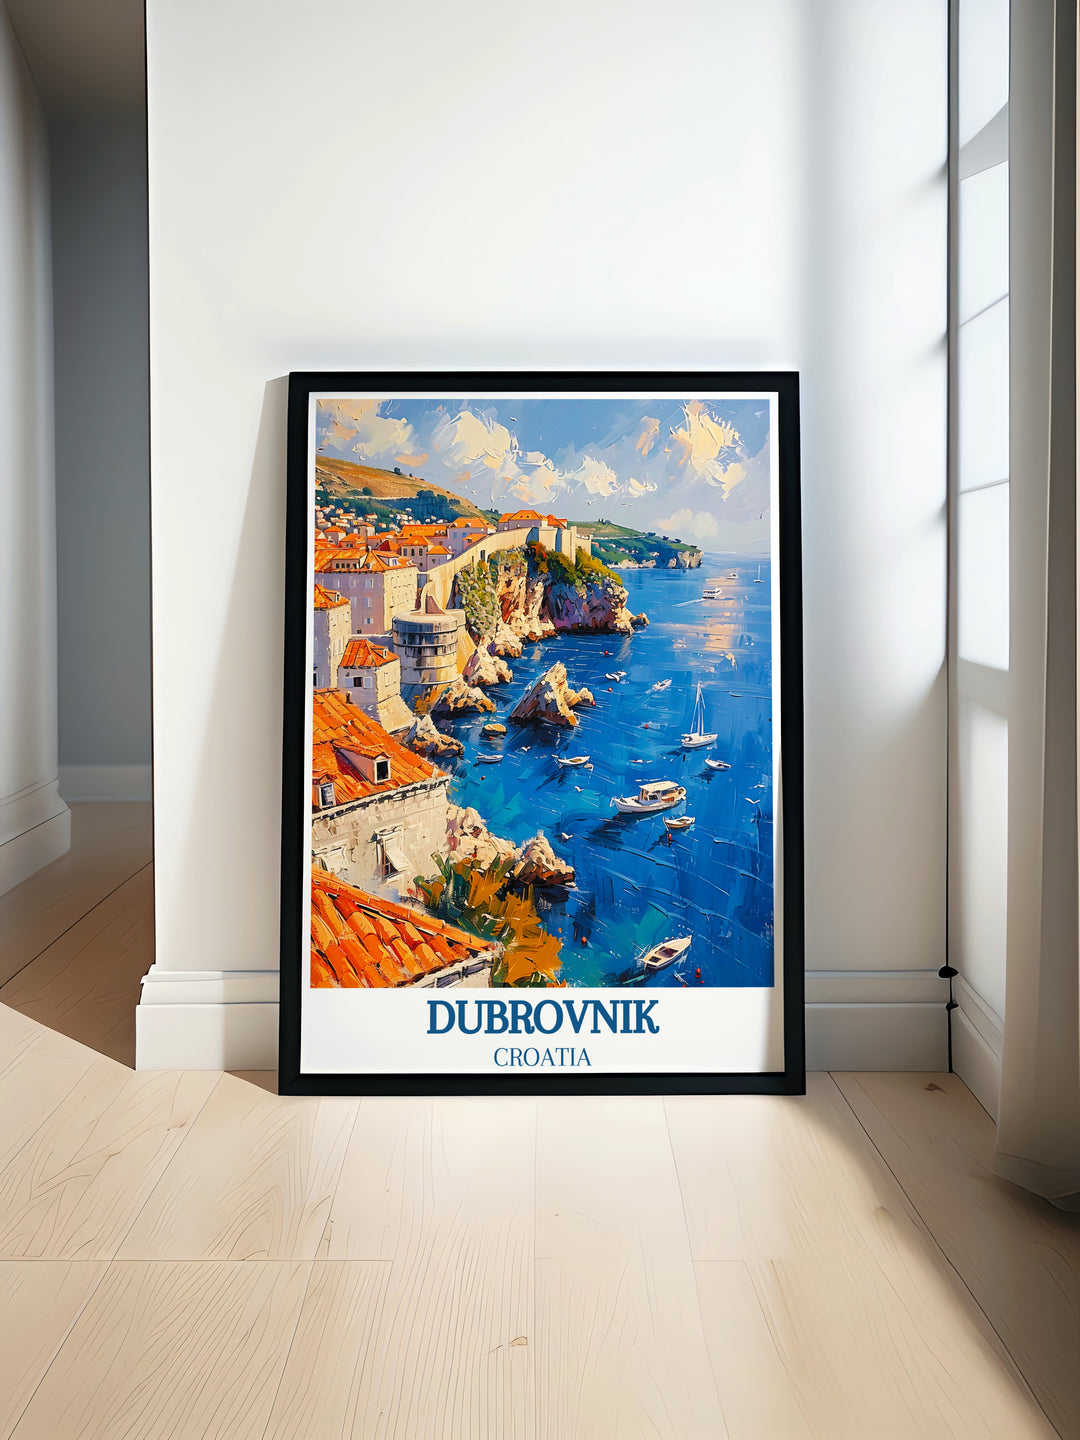 Bring the spirit of Dubrovnik into your home with Travel Poster Wall Art, highlighting the city's timeless allure and Mediterranean charm